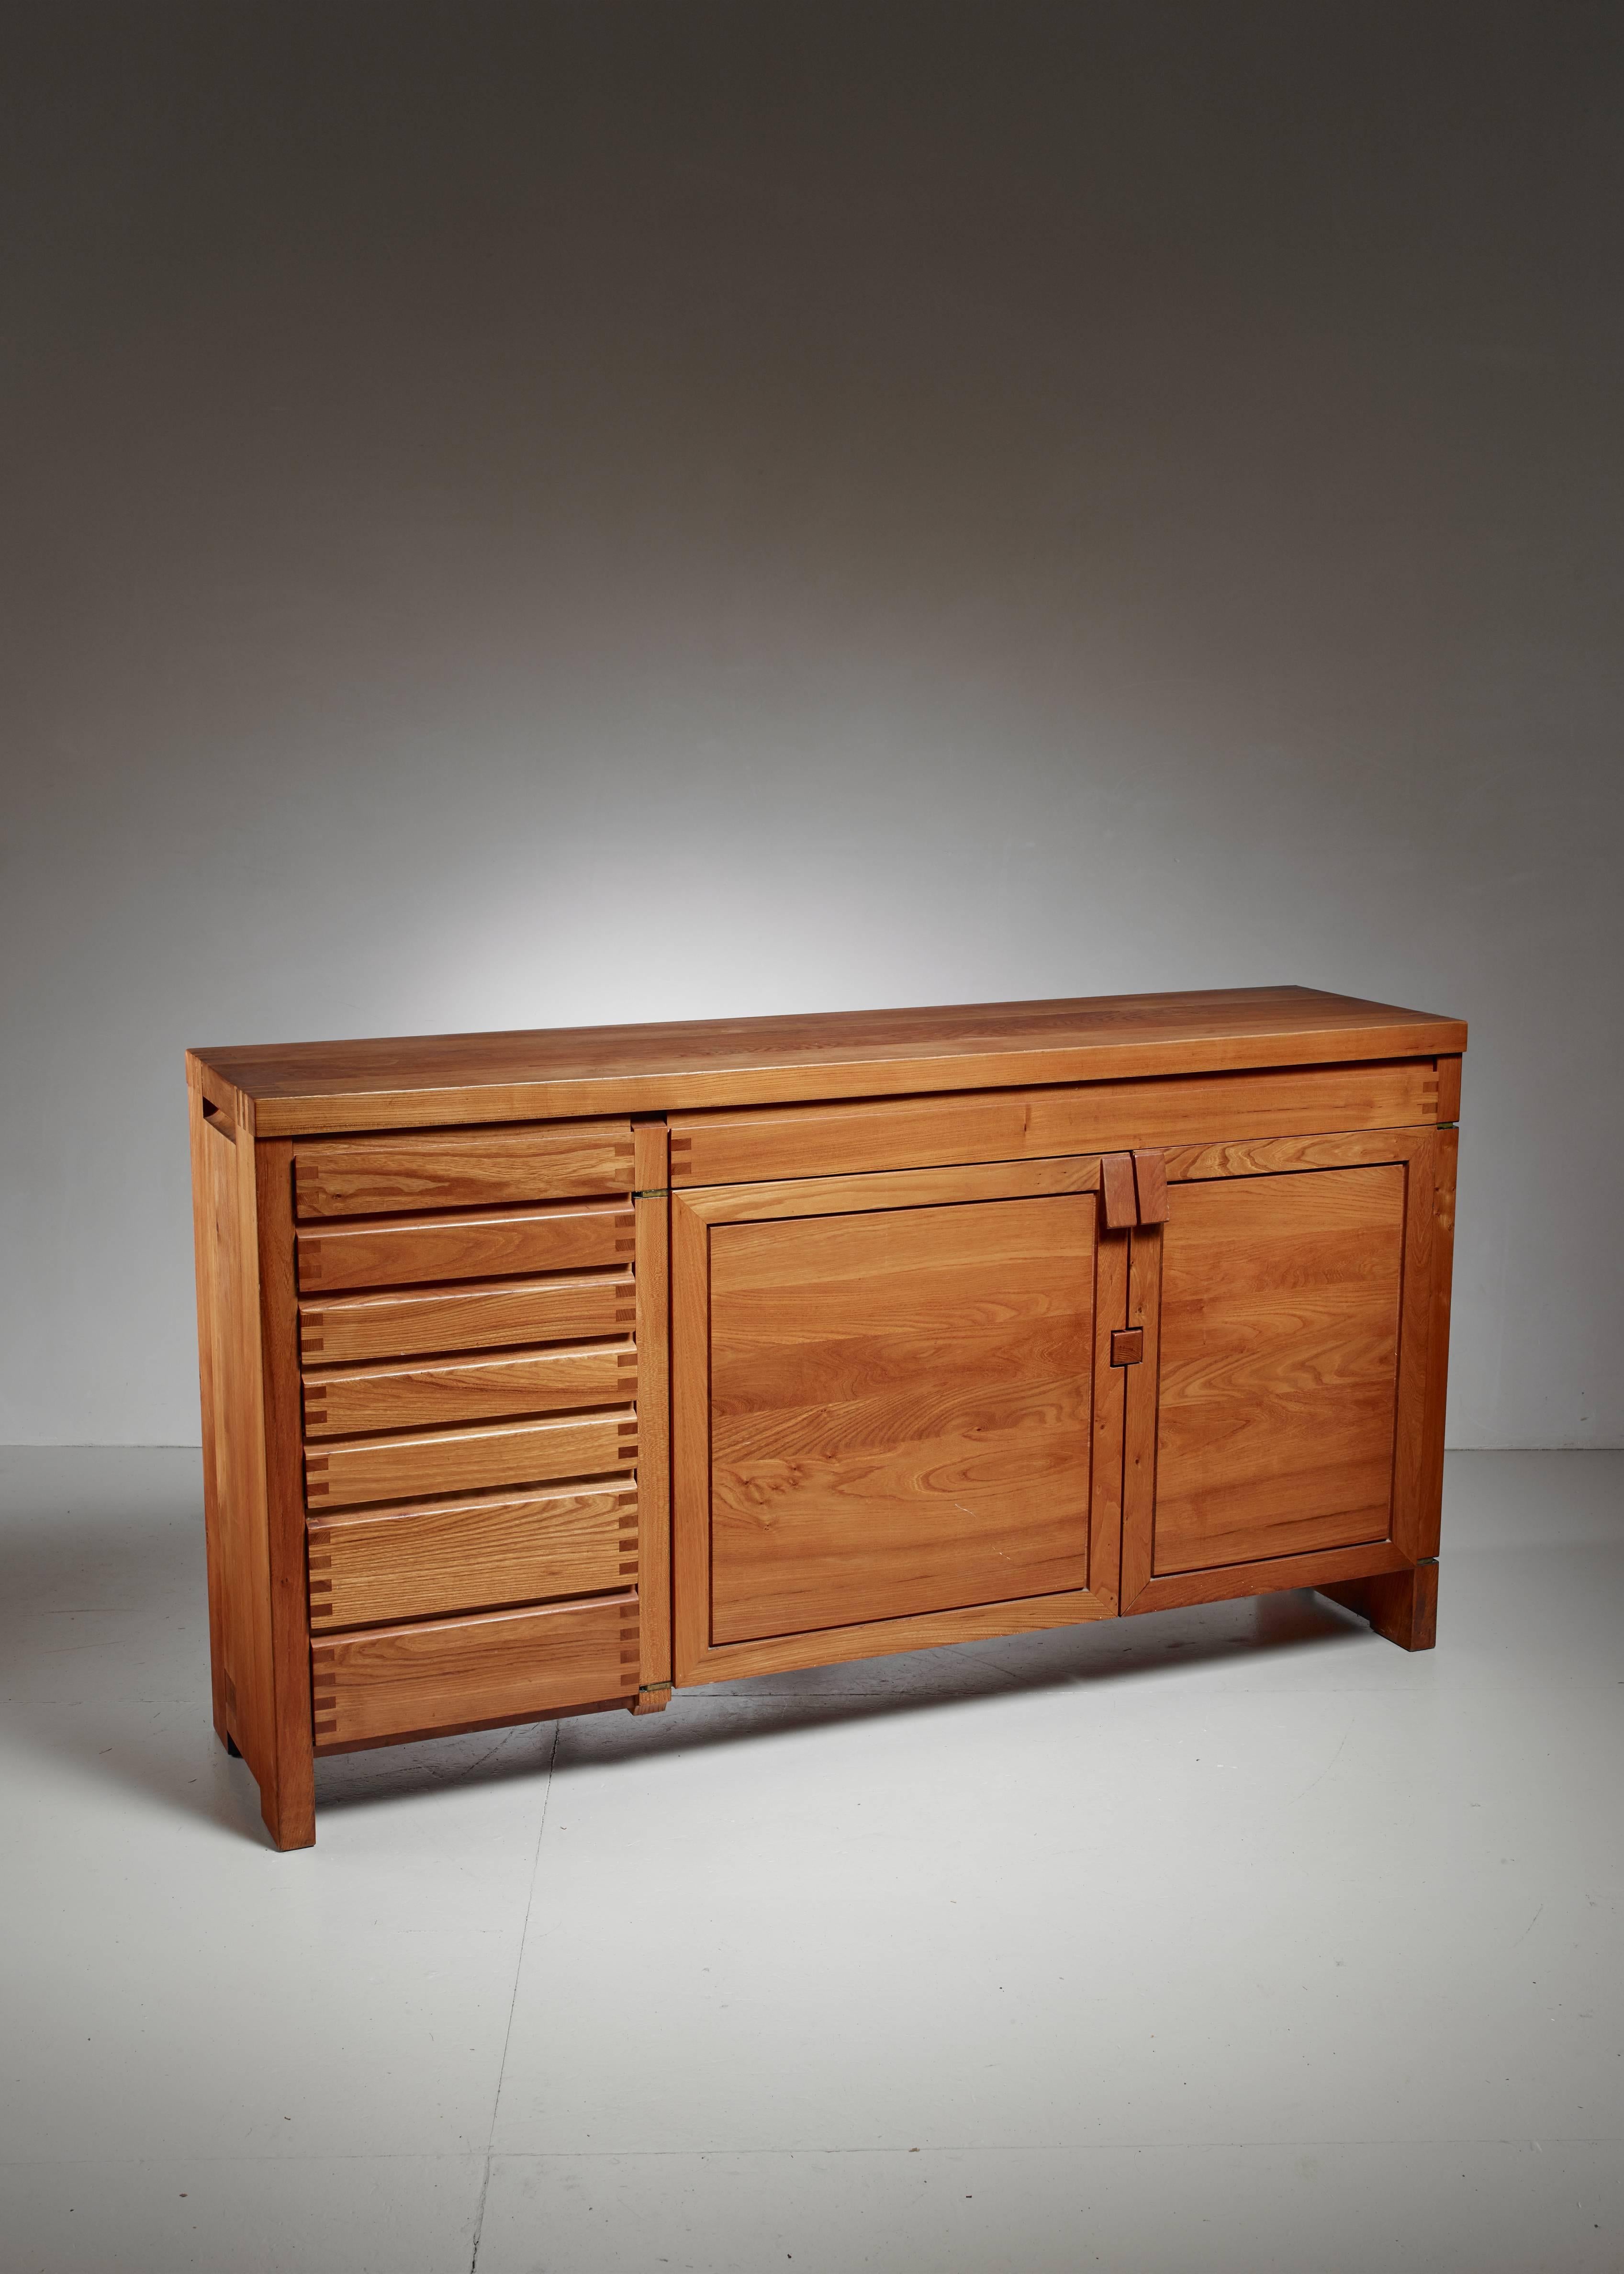 A large custom-made Pierre Chapo model R13 freestanding sideboard. This sideboard has two doors with triangle shaped knobs. The doors are locked by clamping them on the wooden block between them. There are seven smaller drawers and one large drawer